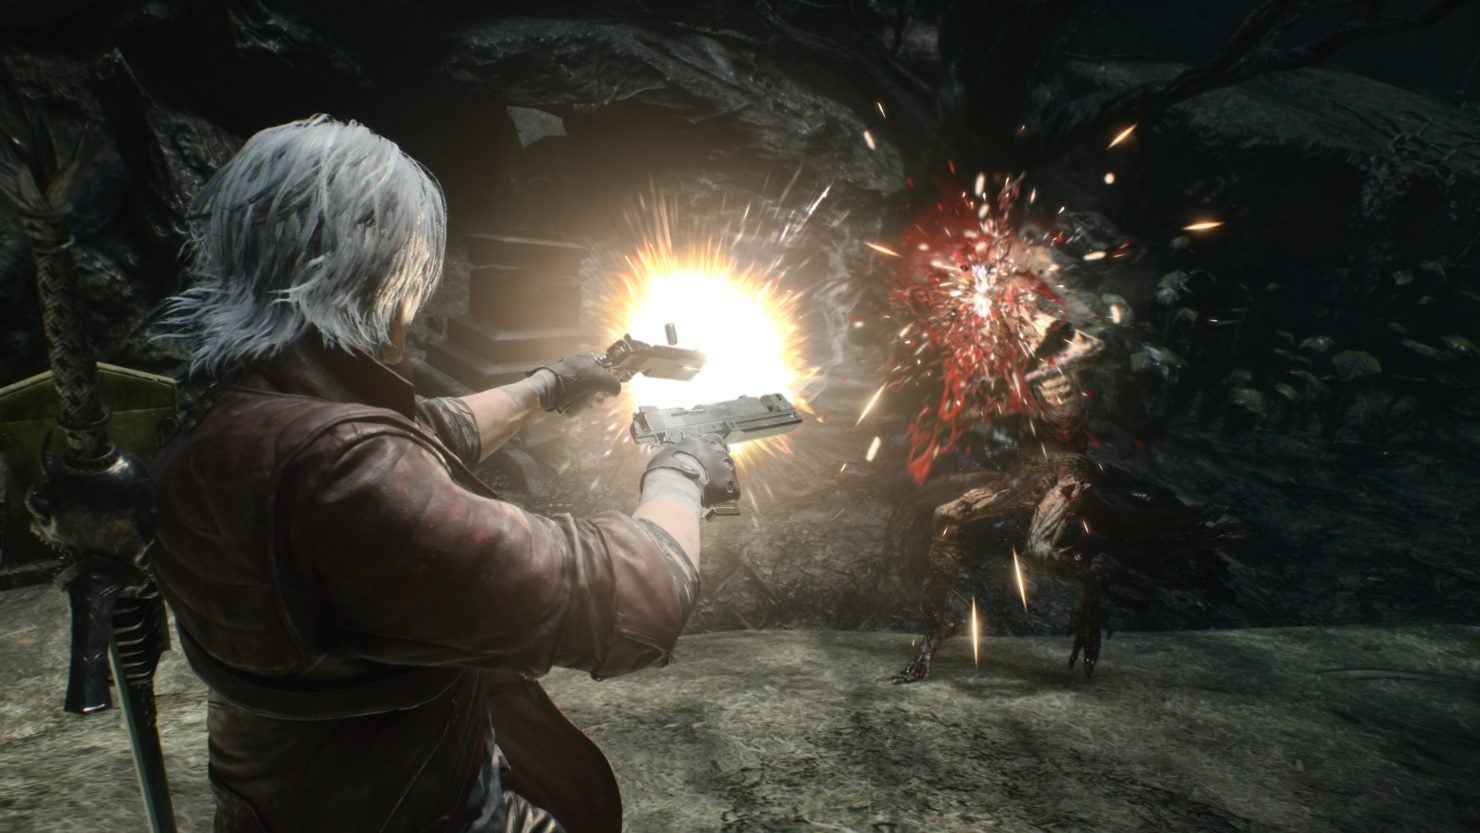 The Devil May Cry 5 image runs smoothly on Steam Deck, according to Capcom